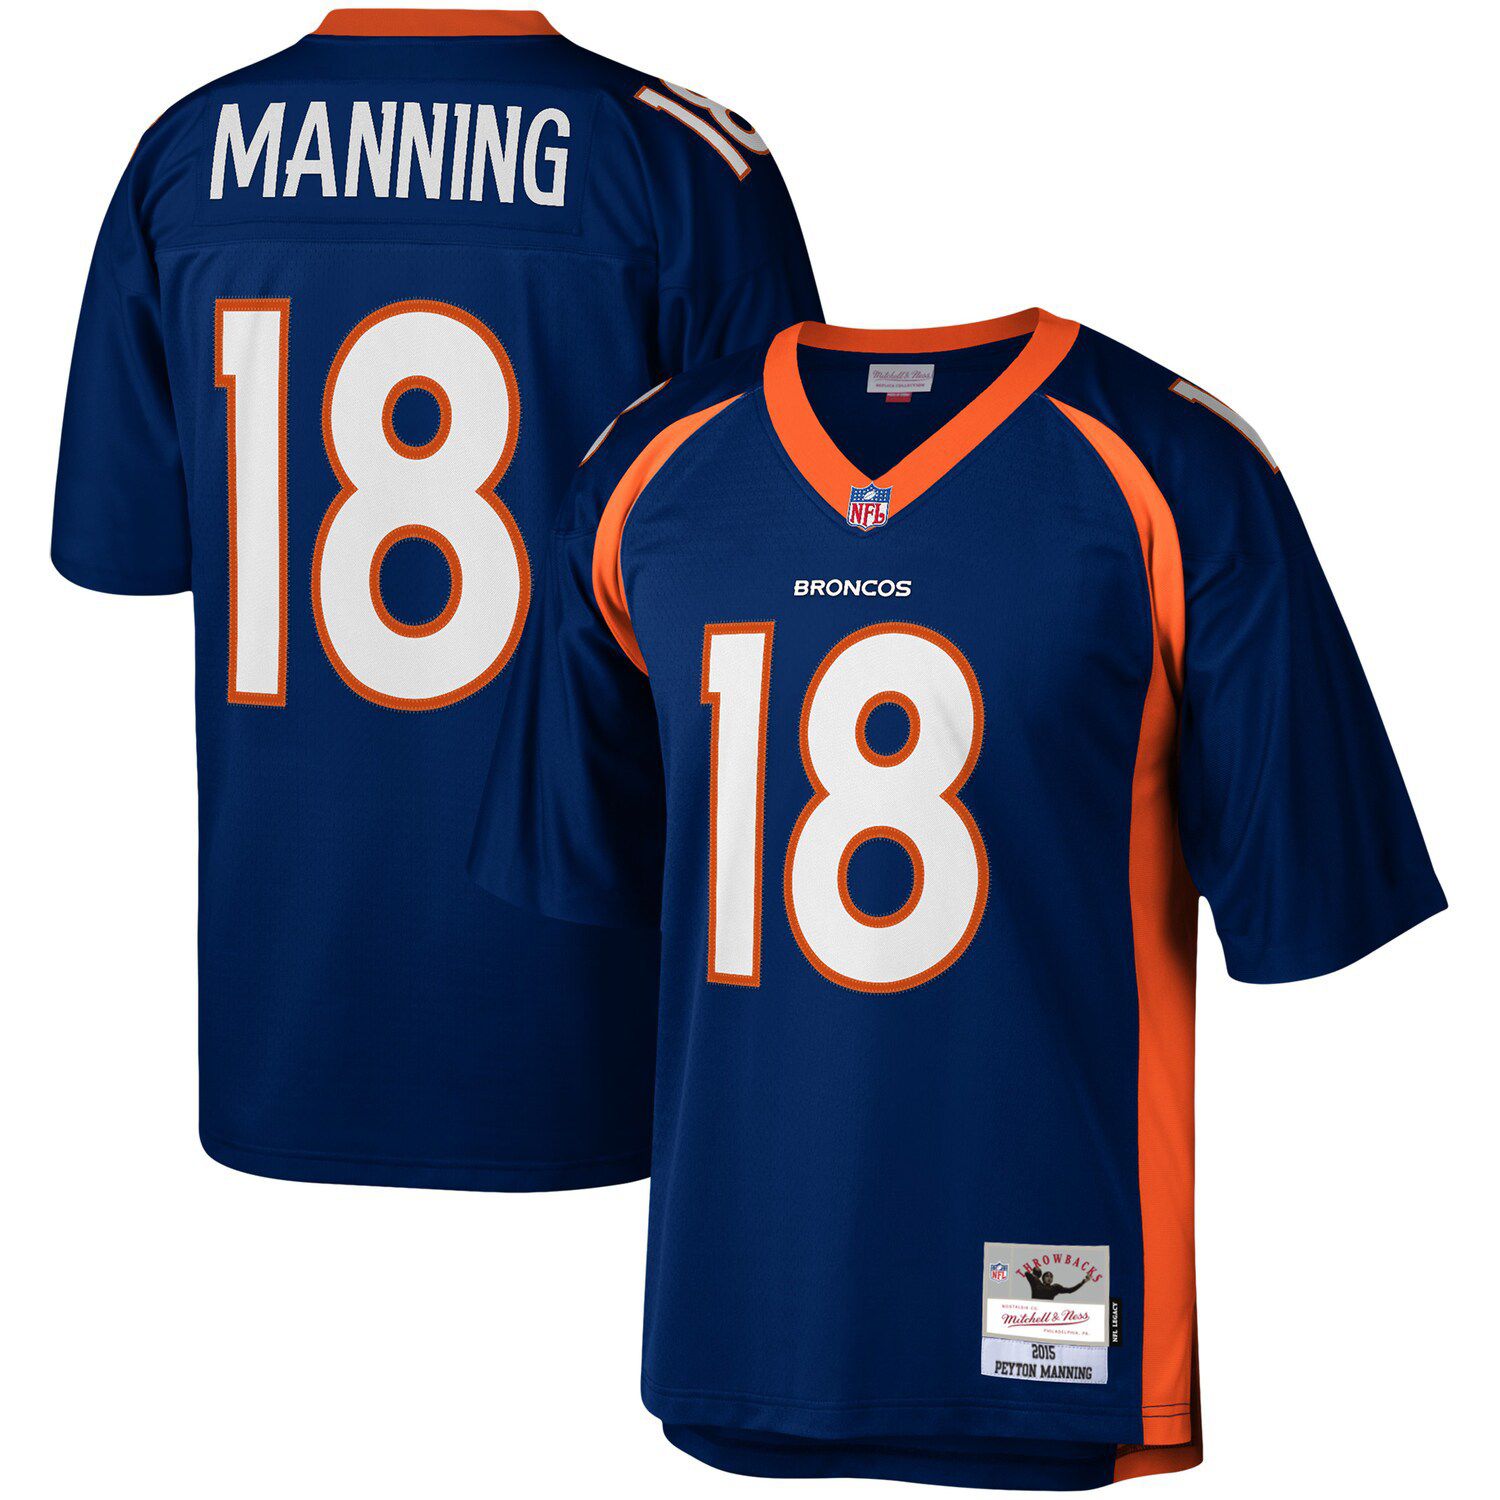 Image for Unbranded Men's Mitchell & Ness Peyton Manning Navy Denver Broncos 2015 Legacy Replica Jersey at Kohl's.